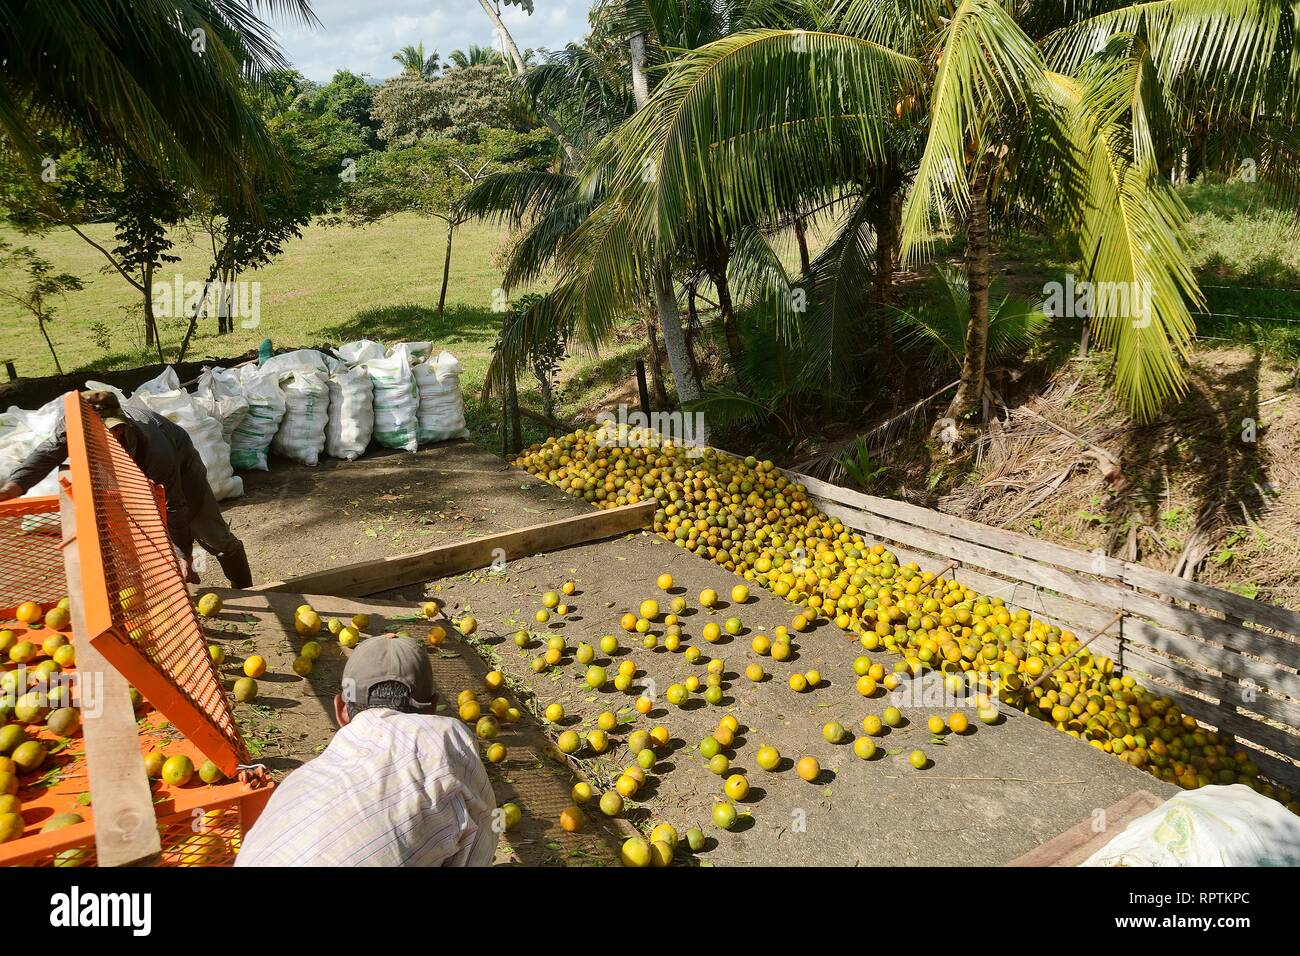 Sittee River Village, Stann Creek District, Belize - February 12, 2019: A load of freshly harvested oranges being loaded onto a citrus truck to be tak Stock Photo